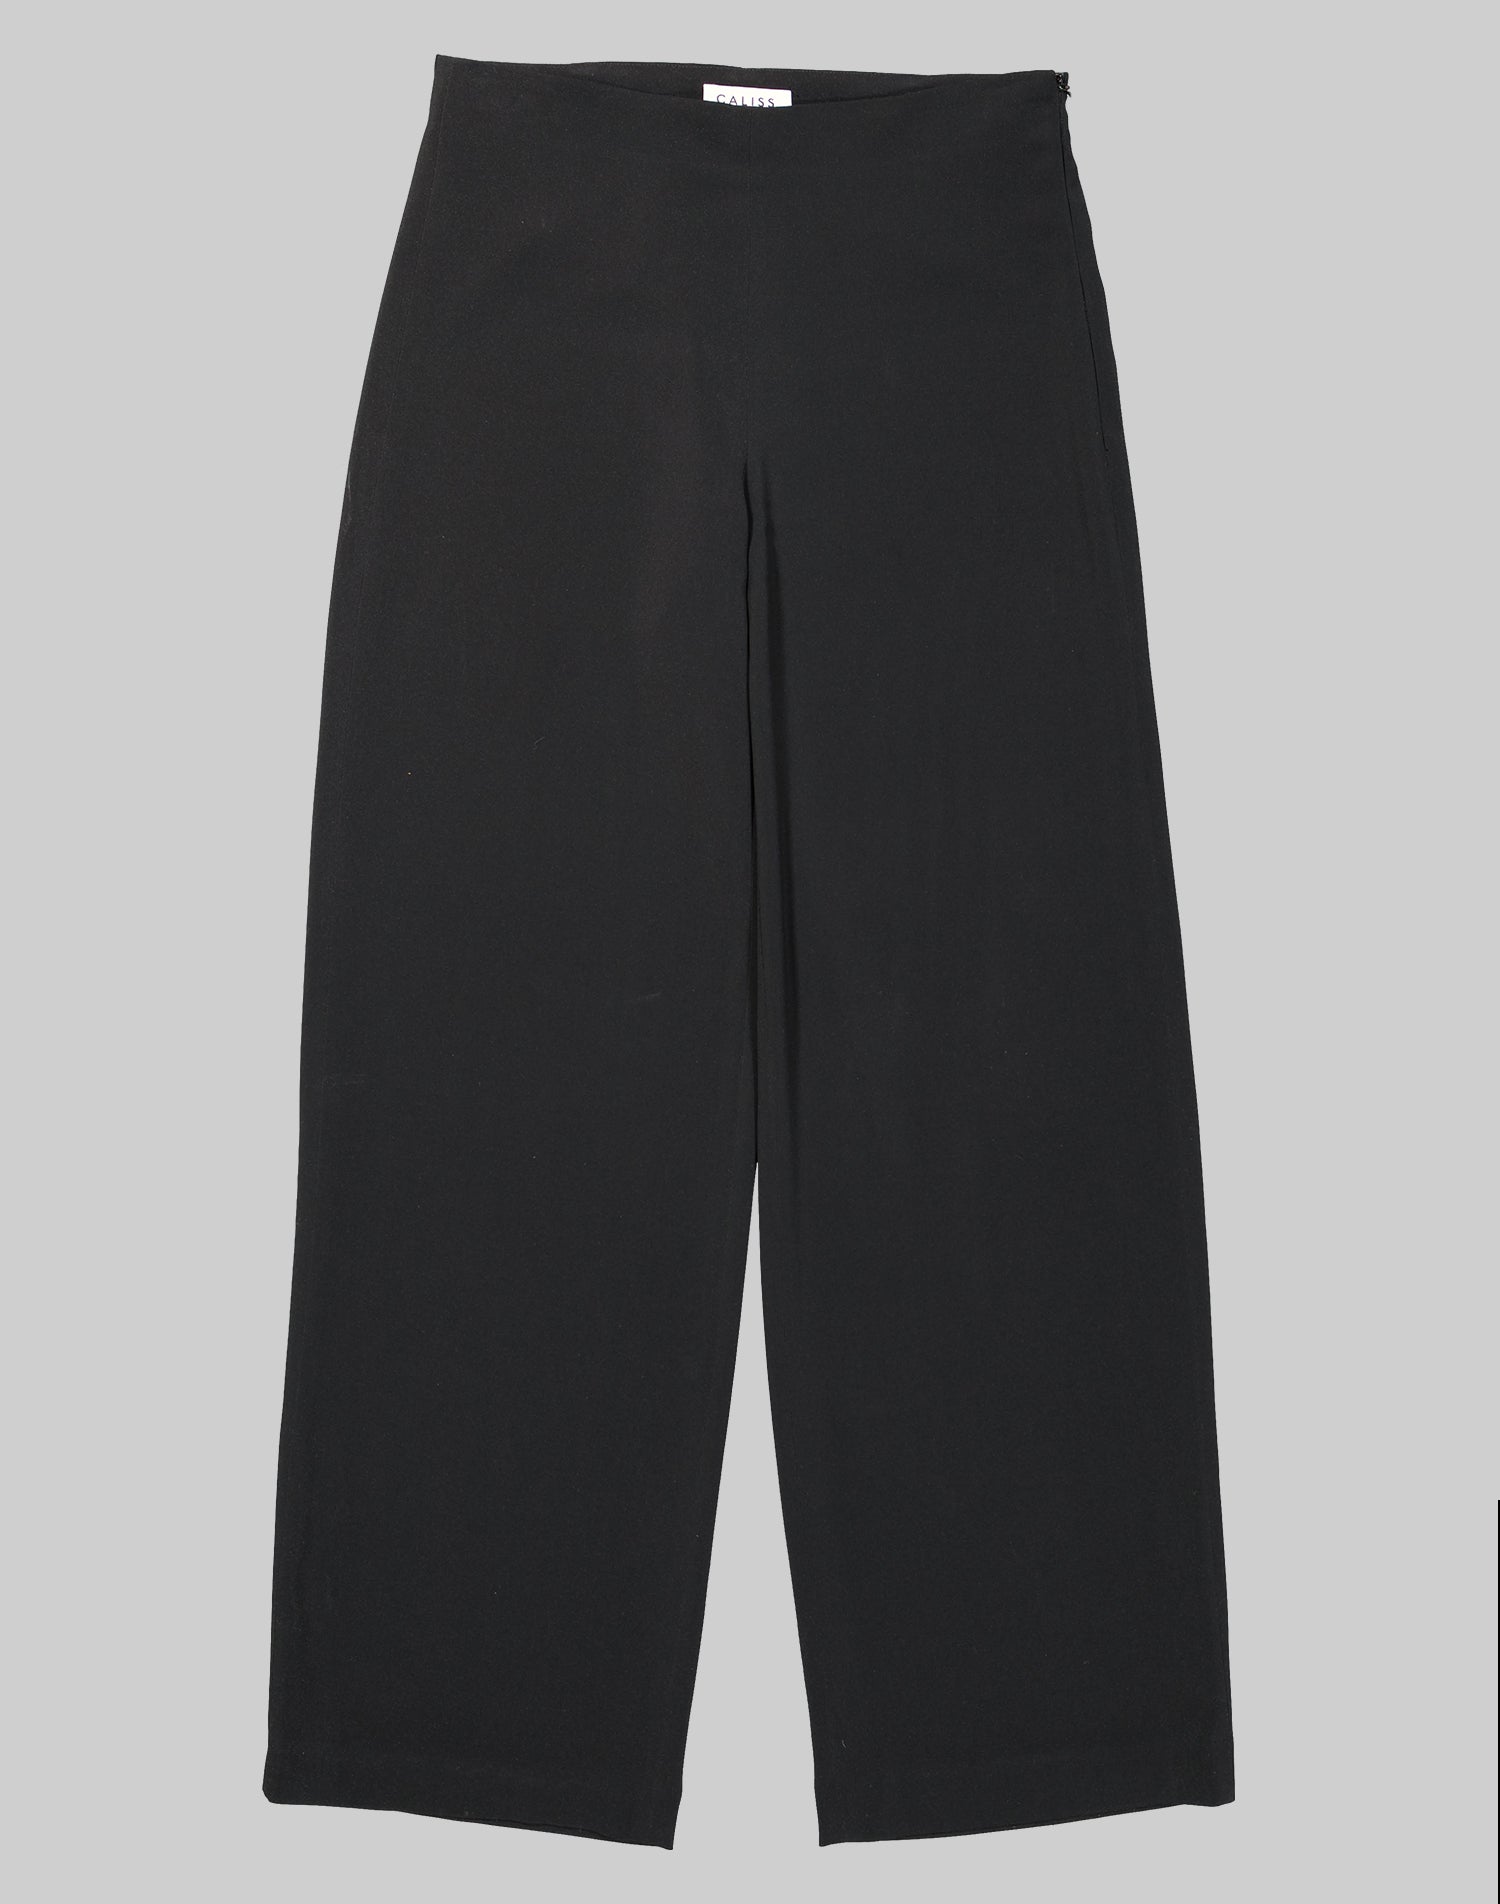 Trousers Nora in black